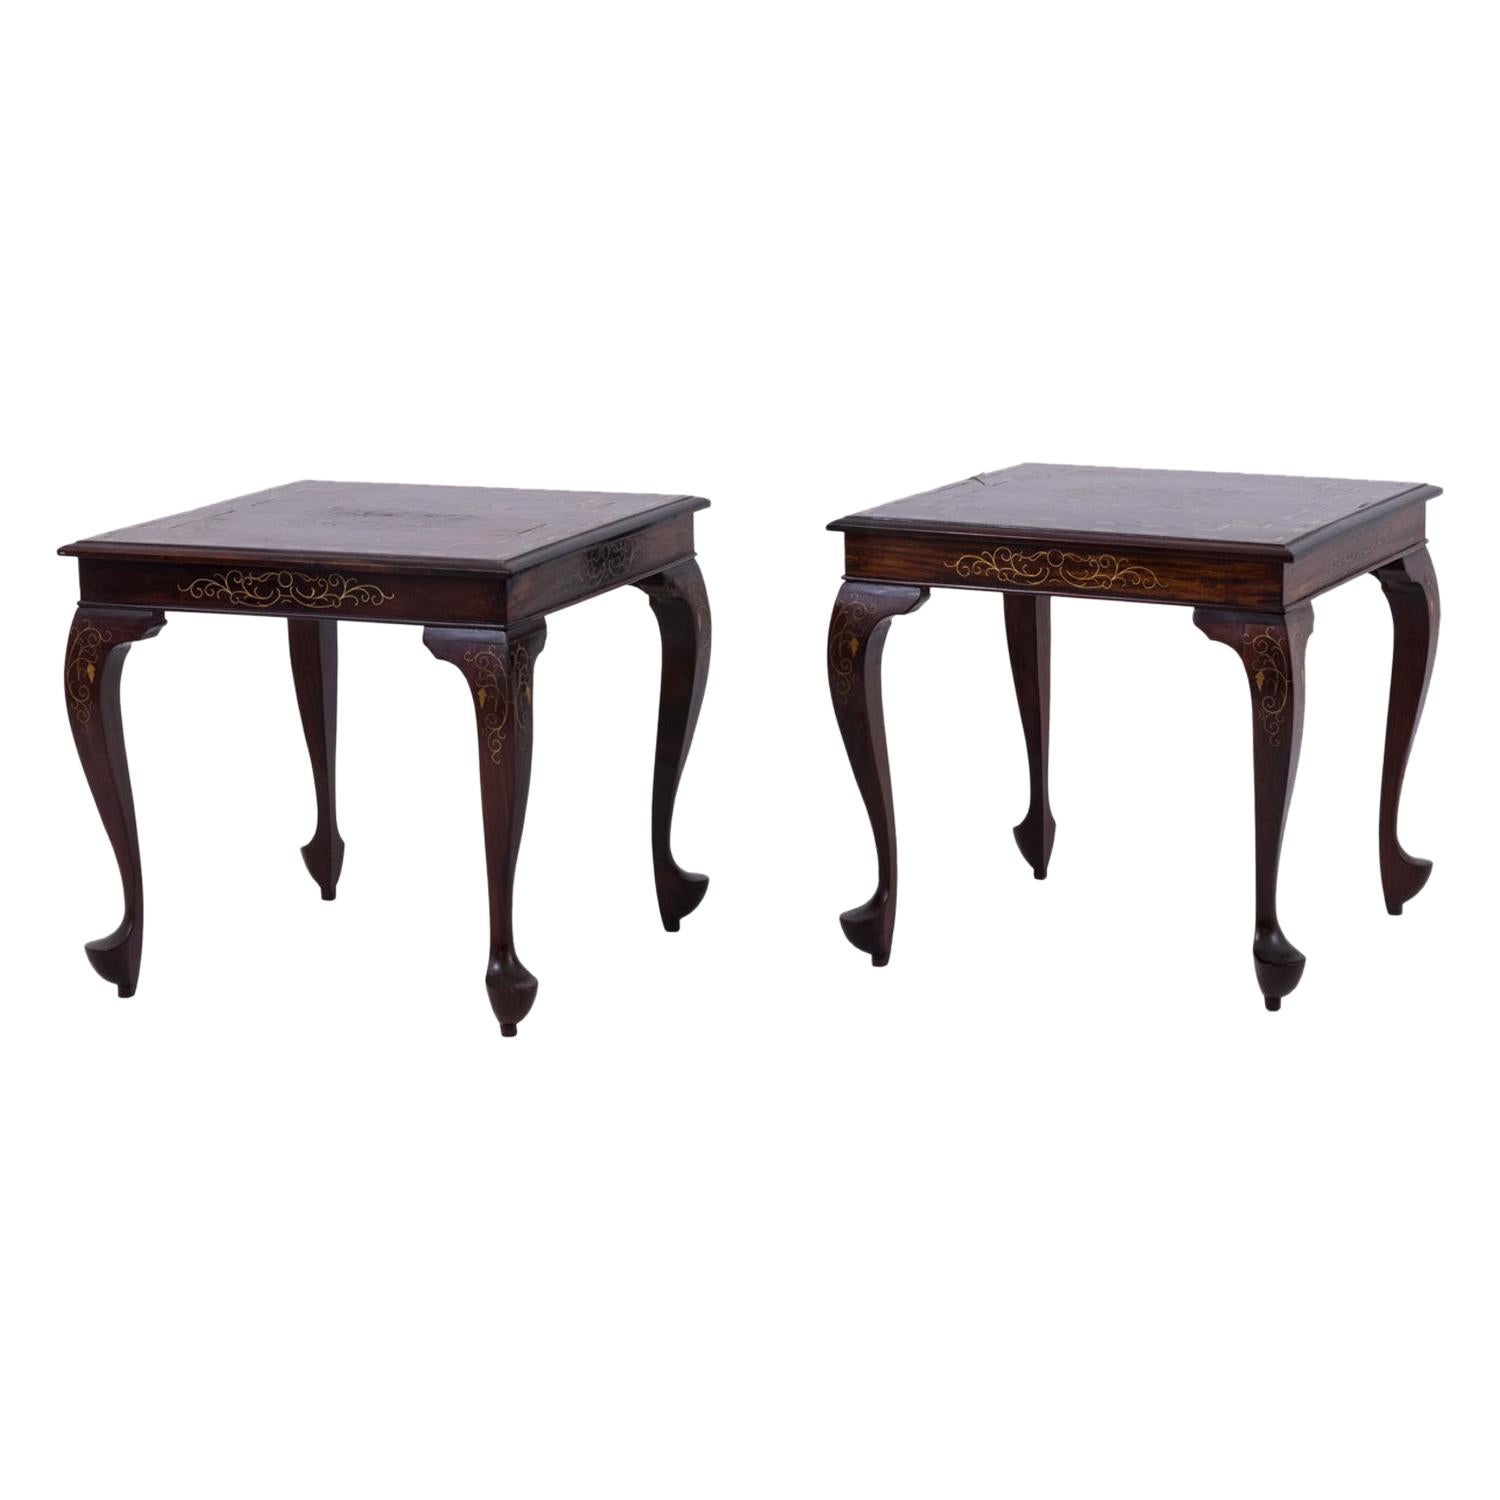 Pair of Chinese Style End Tables in Mahogany and Gilt Brass, Early 20th Century